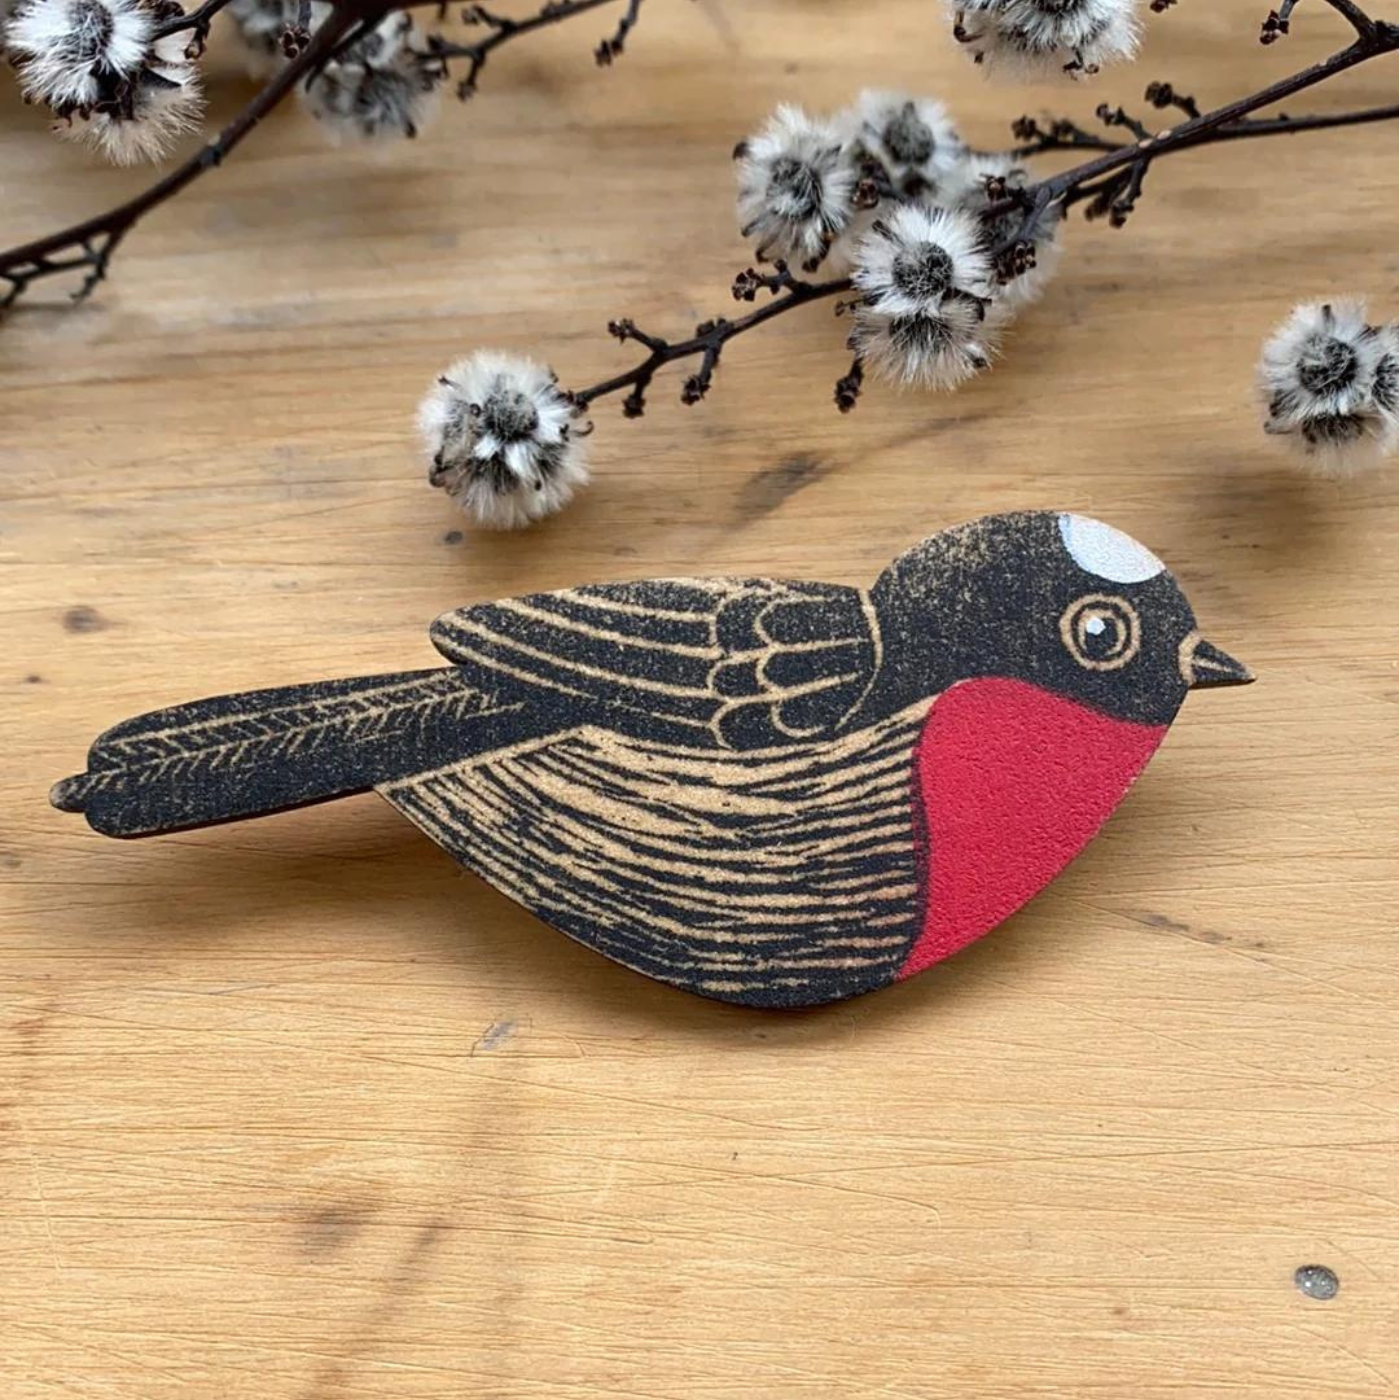 PIGMENT Monica Reeve - Brooch - Red Robin